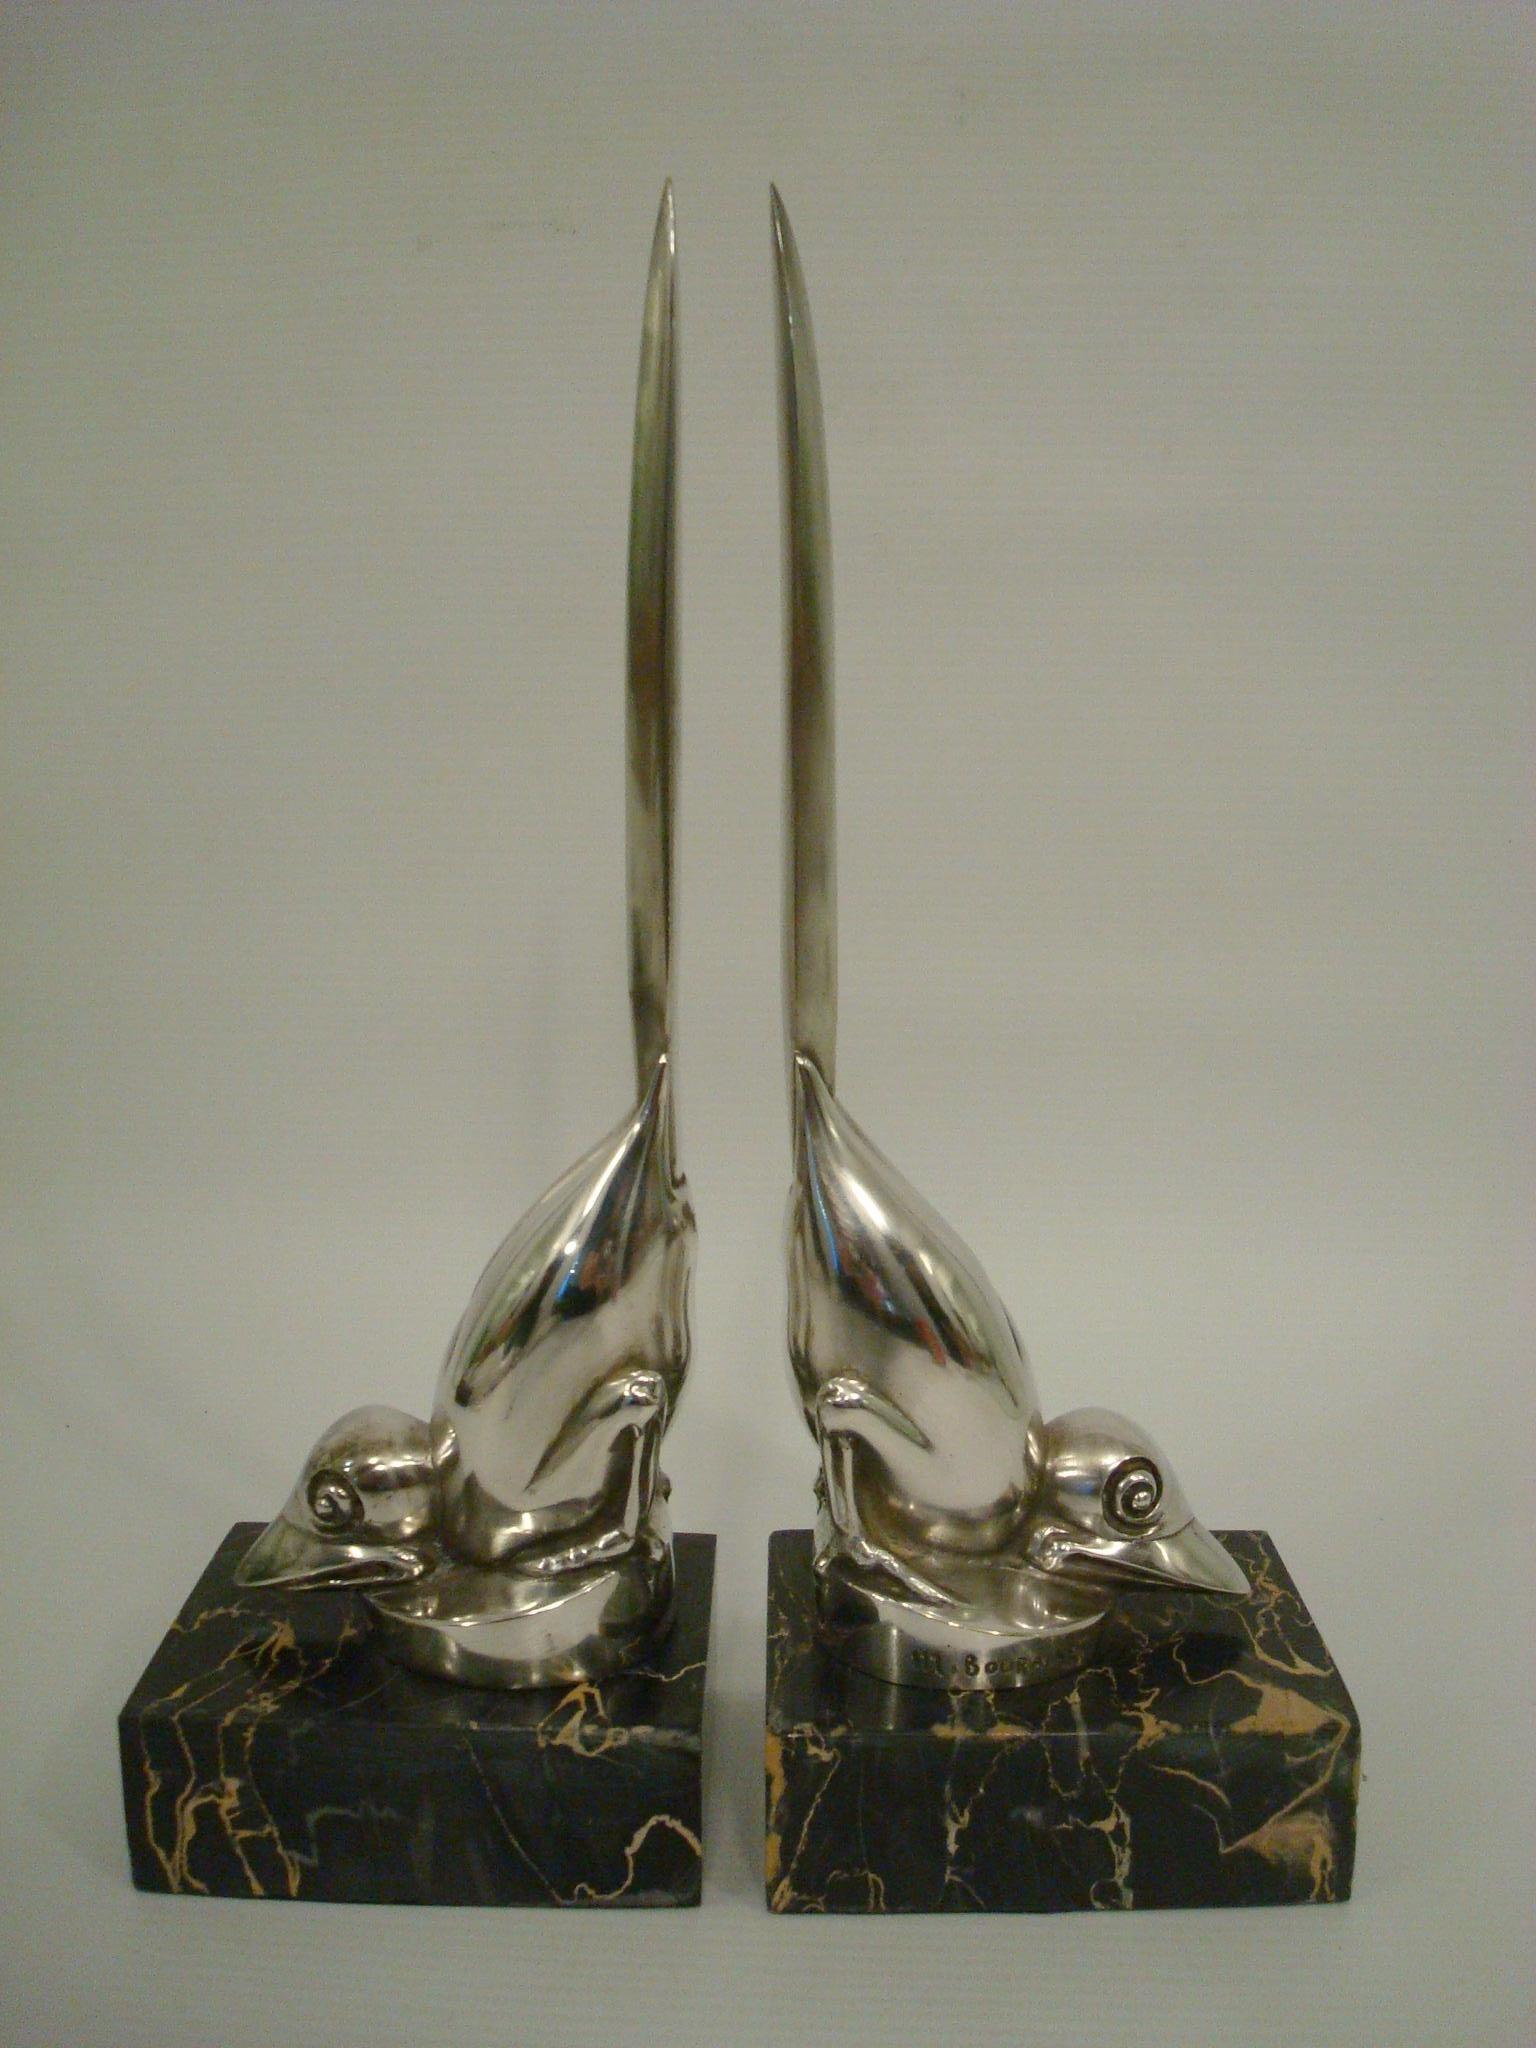 Pair of Art Deco silvered bronze bird bookends. Silver plated bronze figures mounted over black and gold italian marble bases.
Both signed M. Bouraine and marked france.
Very clean lines sculptures. Very chic.